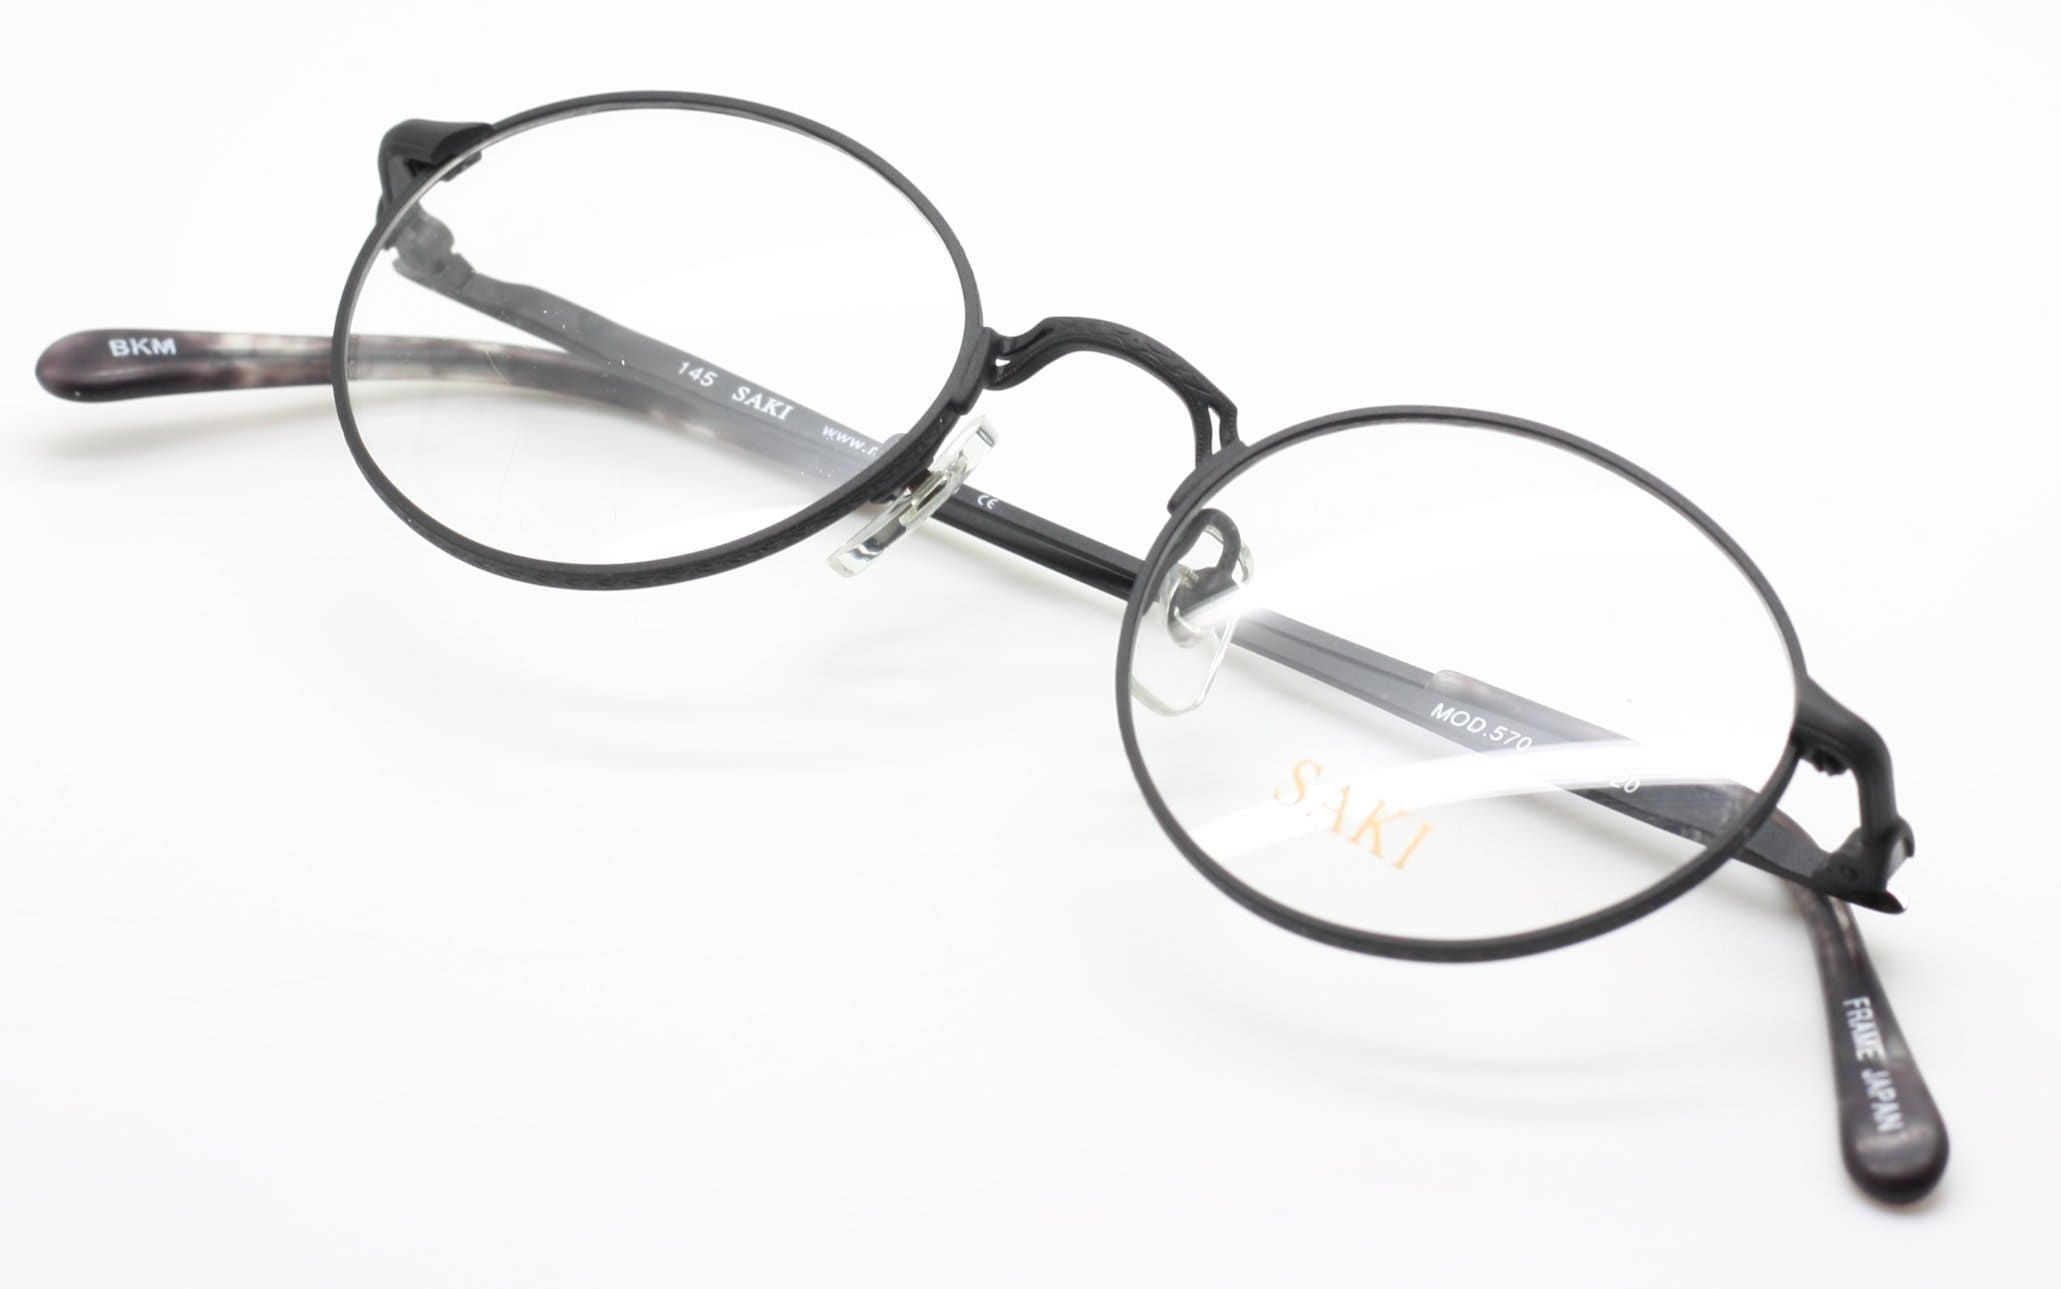 Stereotype Malignant Get acquainted Engraved Matt Black Oval Frames by SAKI 570 Made in Japan - Etsy